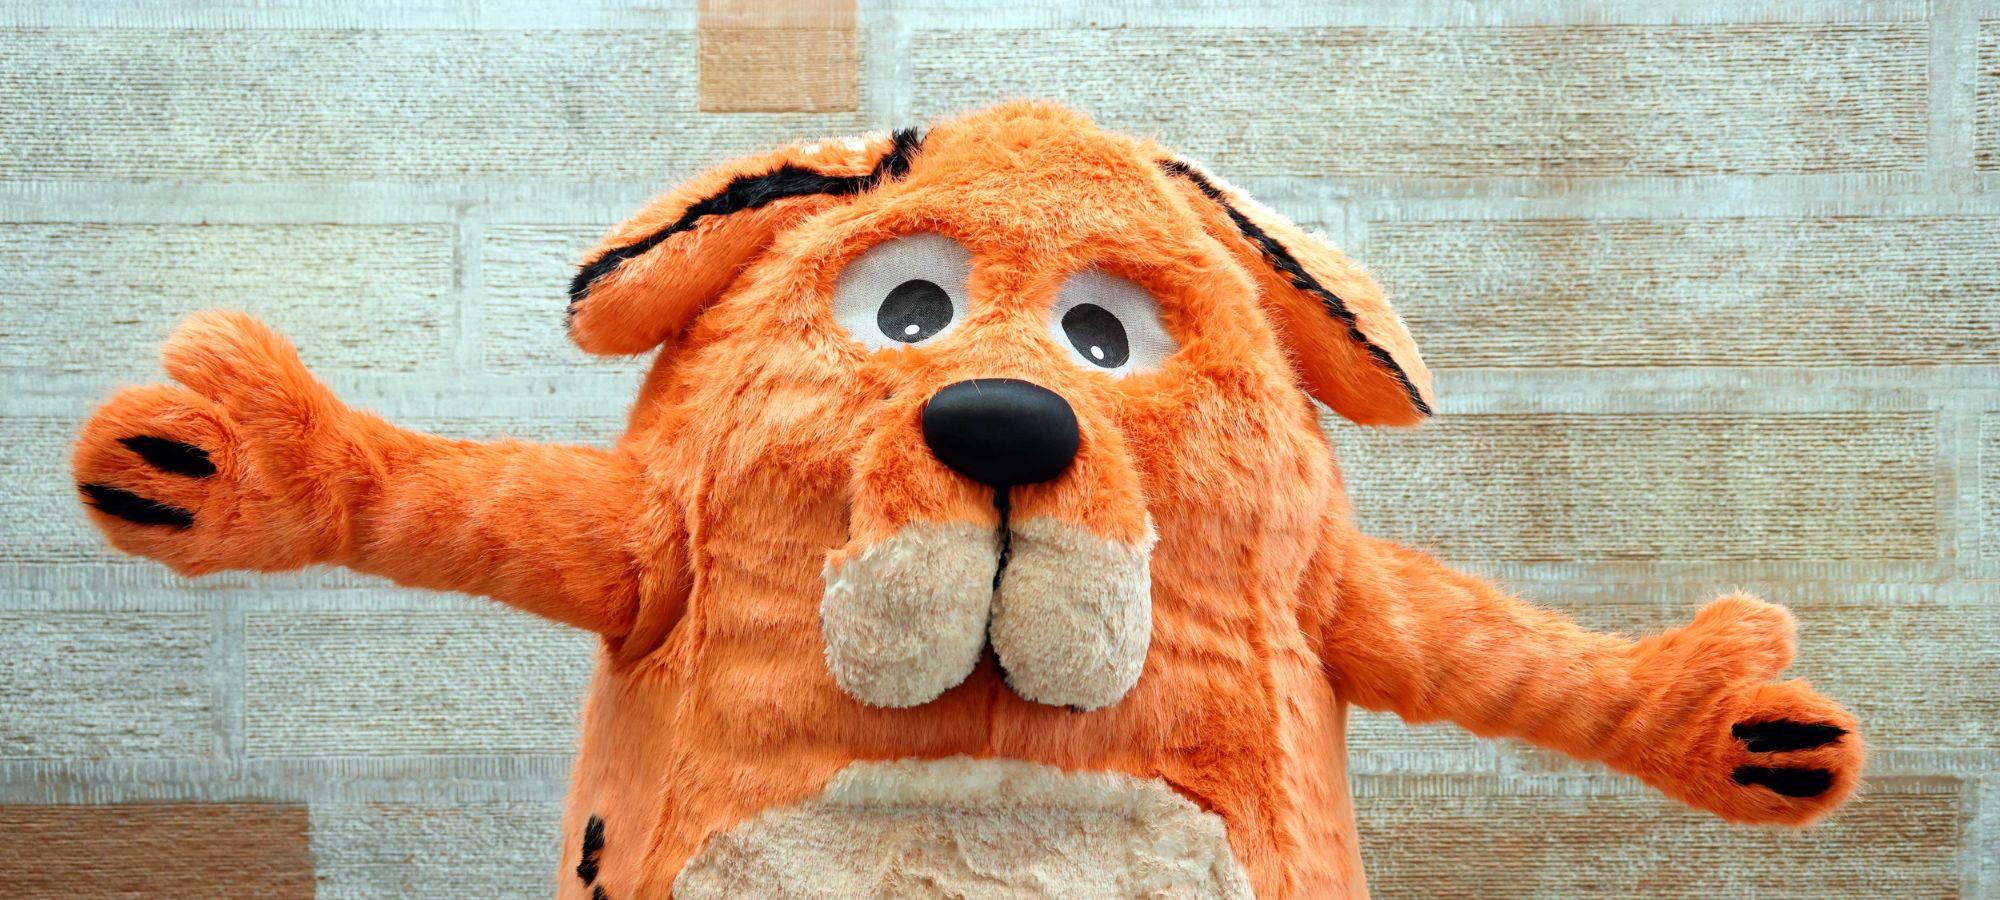 The Big Dog mascot, a large and fluffy orange dog, from the children's book festival taking place in Dumfries.